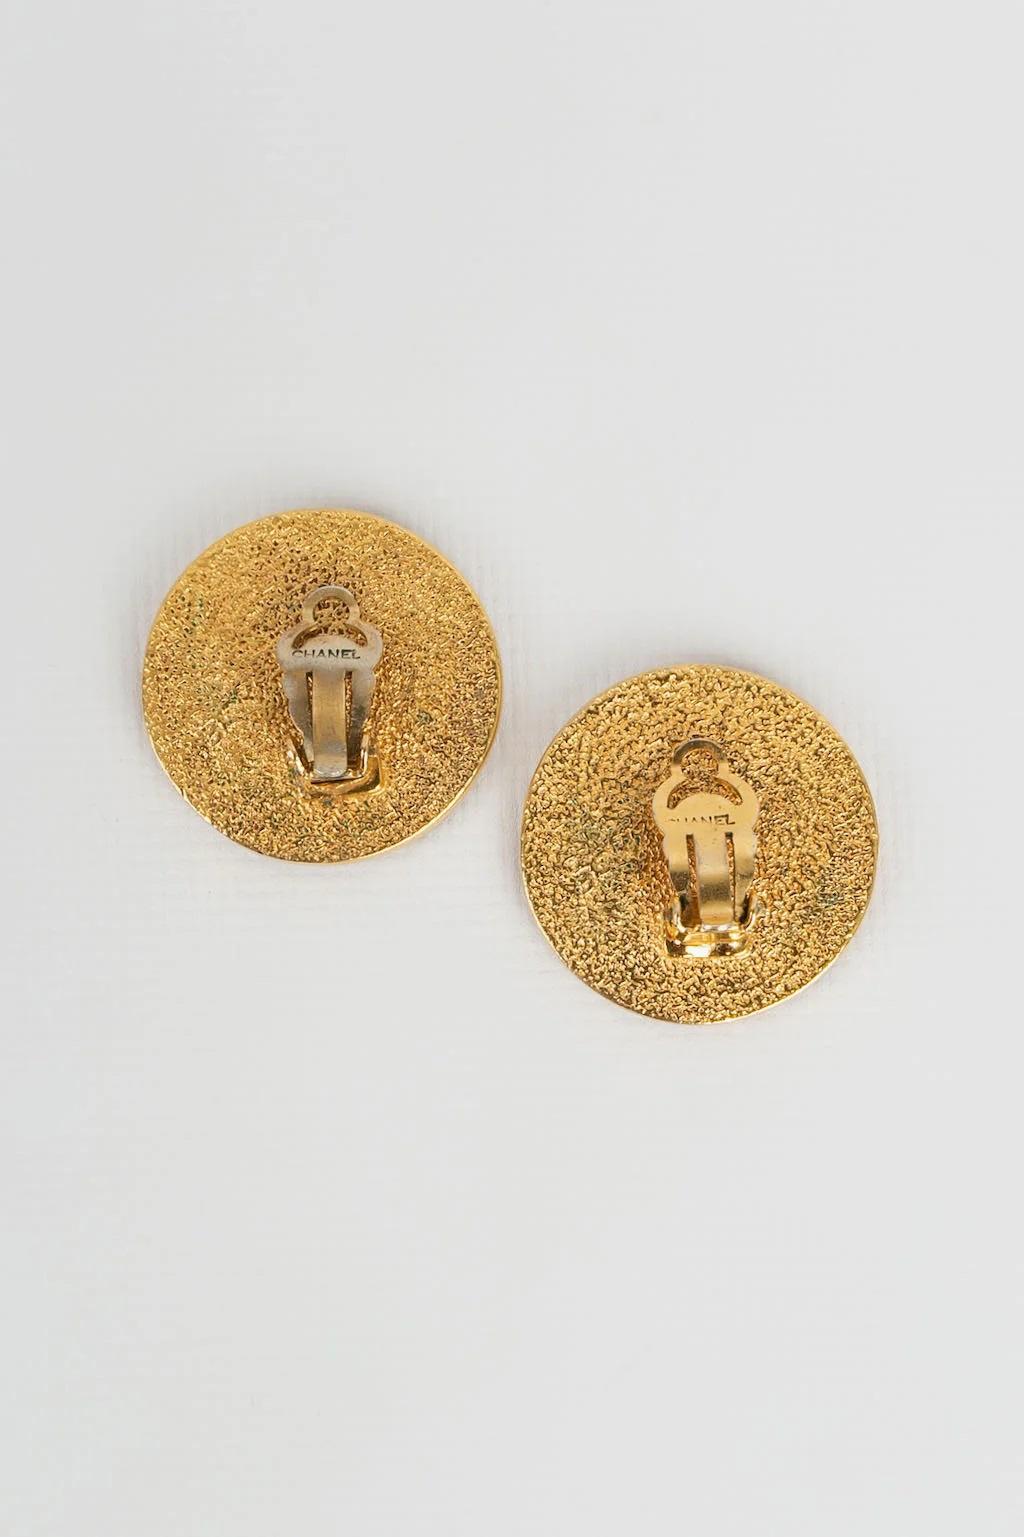 Chanel - Gold-plated clip earrings featuring a four-leaf clover.

Additional information:

Dimensions: 
Ø 3.5 cm

Condition: Very good condition

Seller Ref number: BOB36